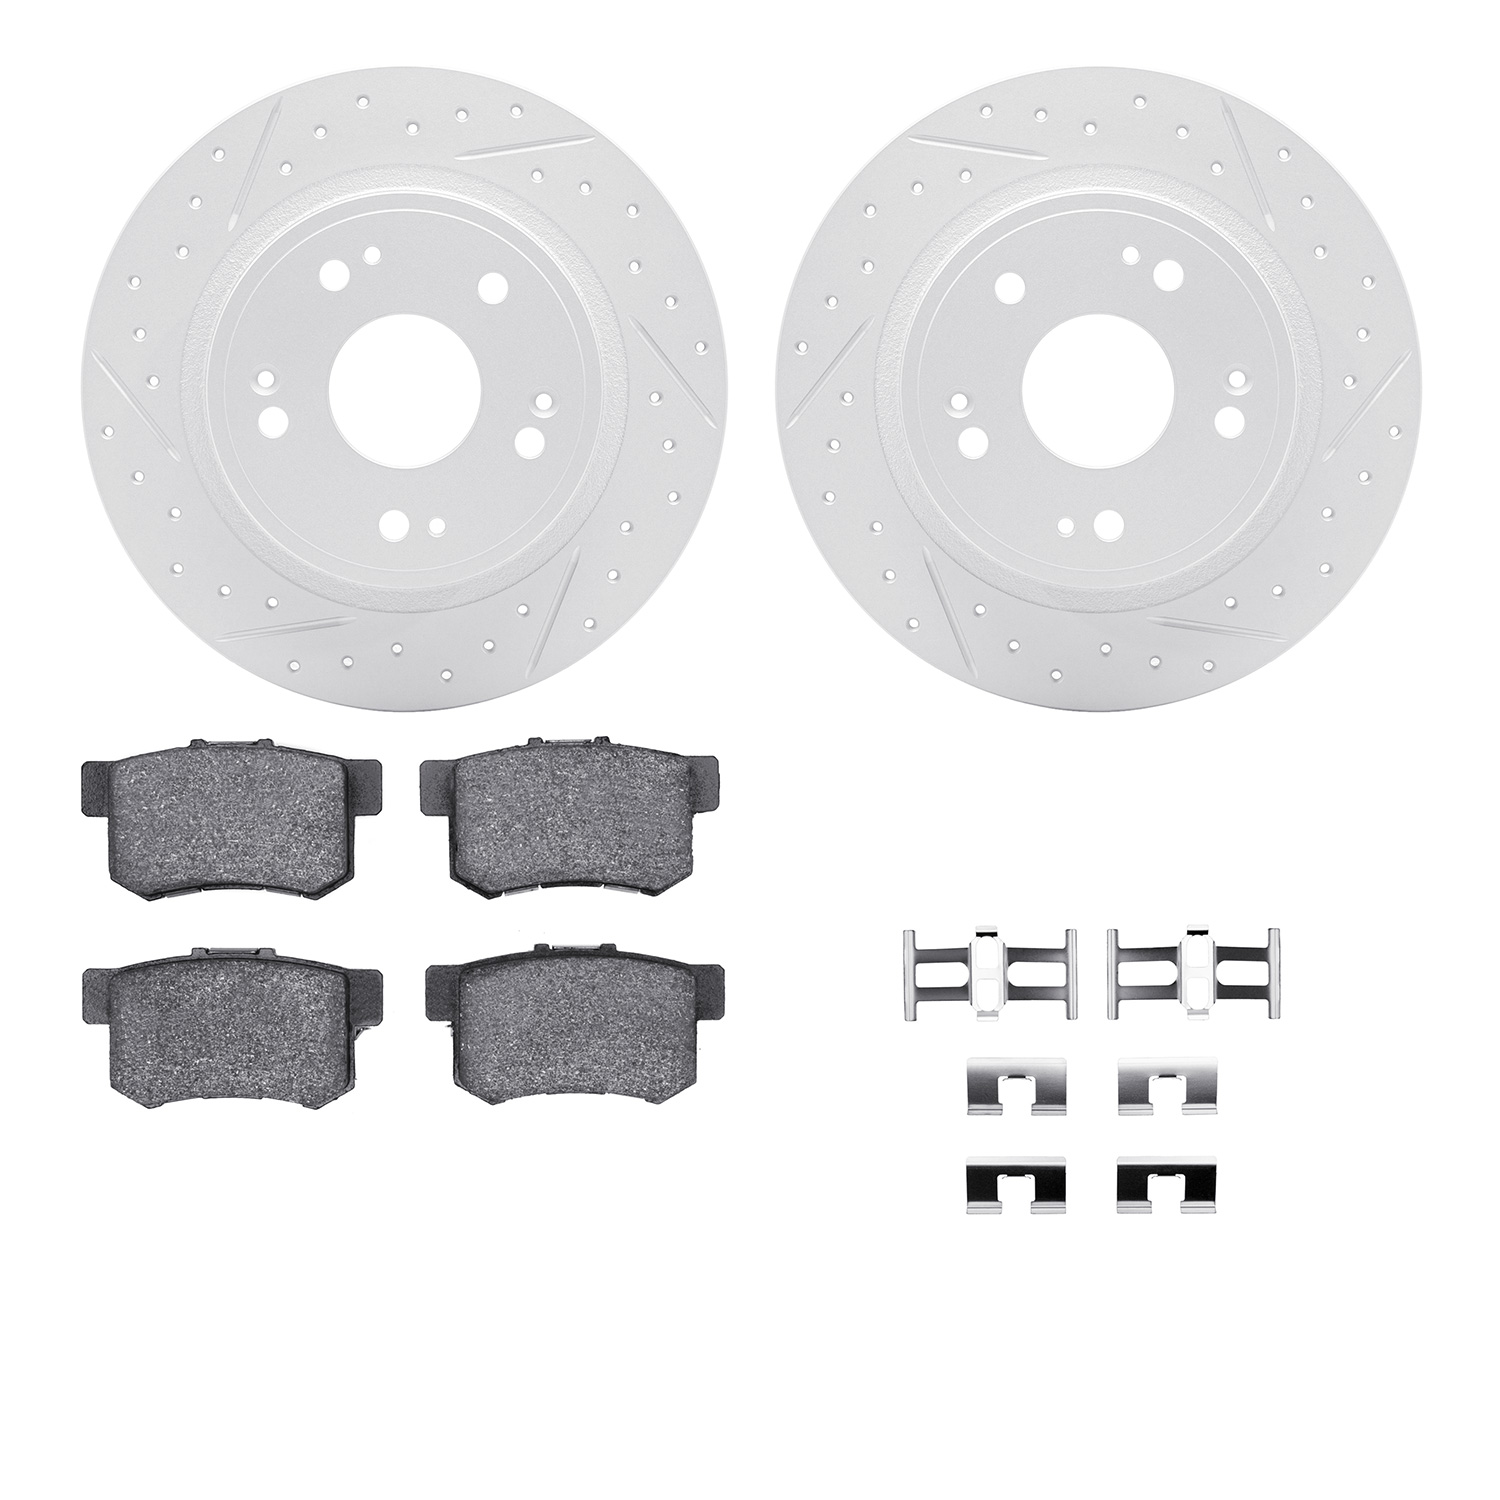 2512-59033 Geoperformance Drilled/Slotted Rotors w/5000 Advanced Brake Pads Kit & Hardware, Fits Select Acura/Honda, Position: R